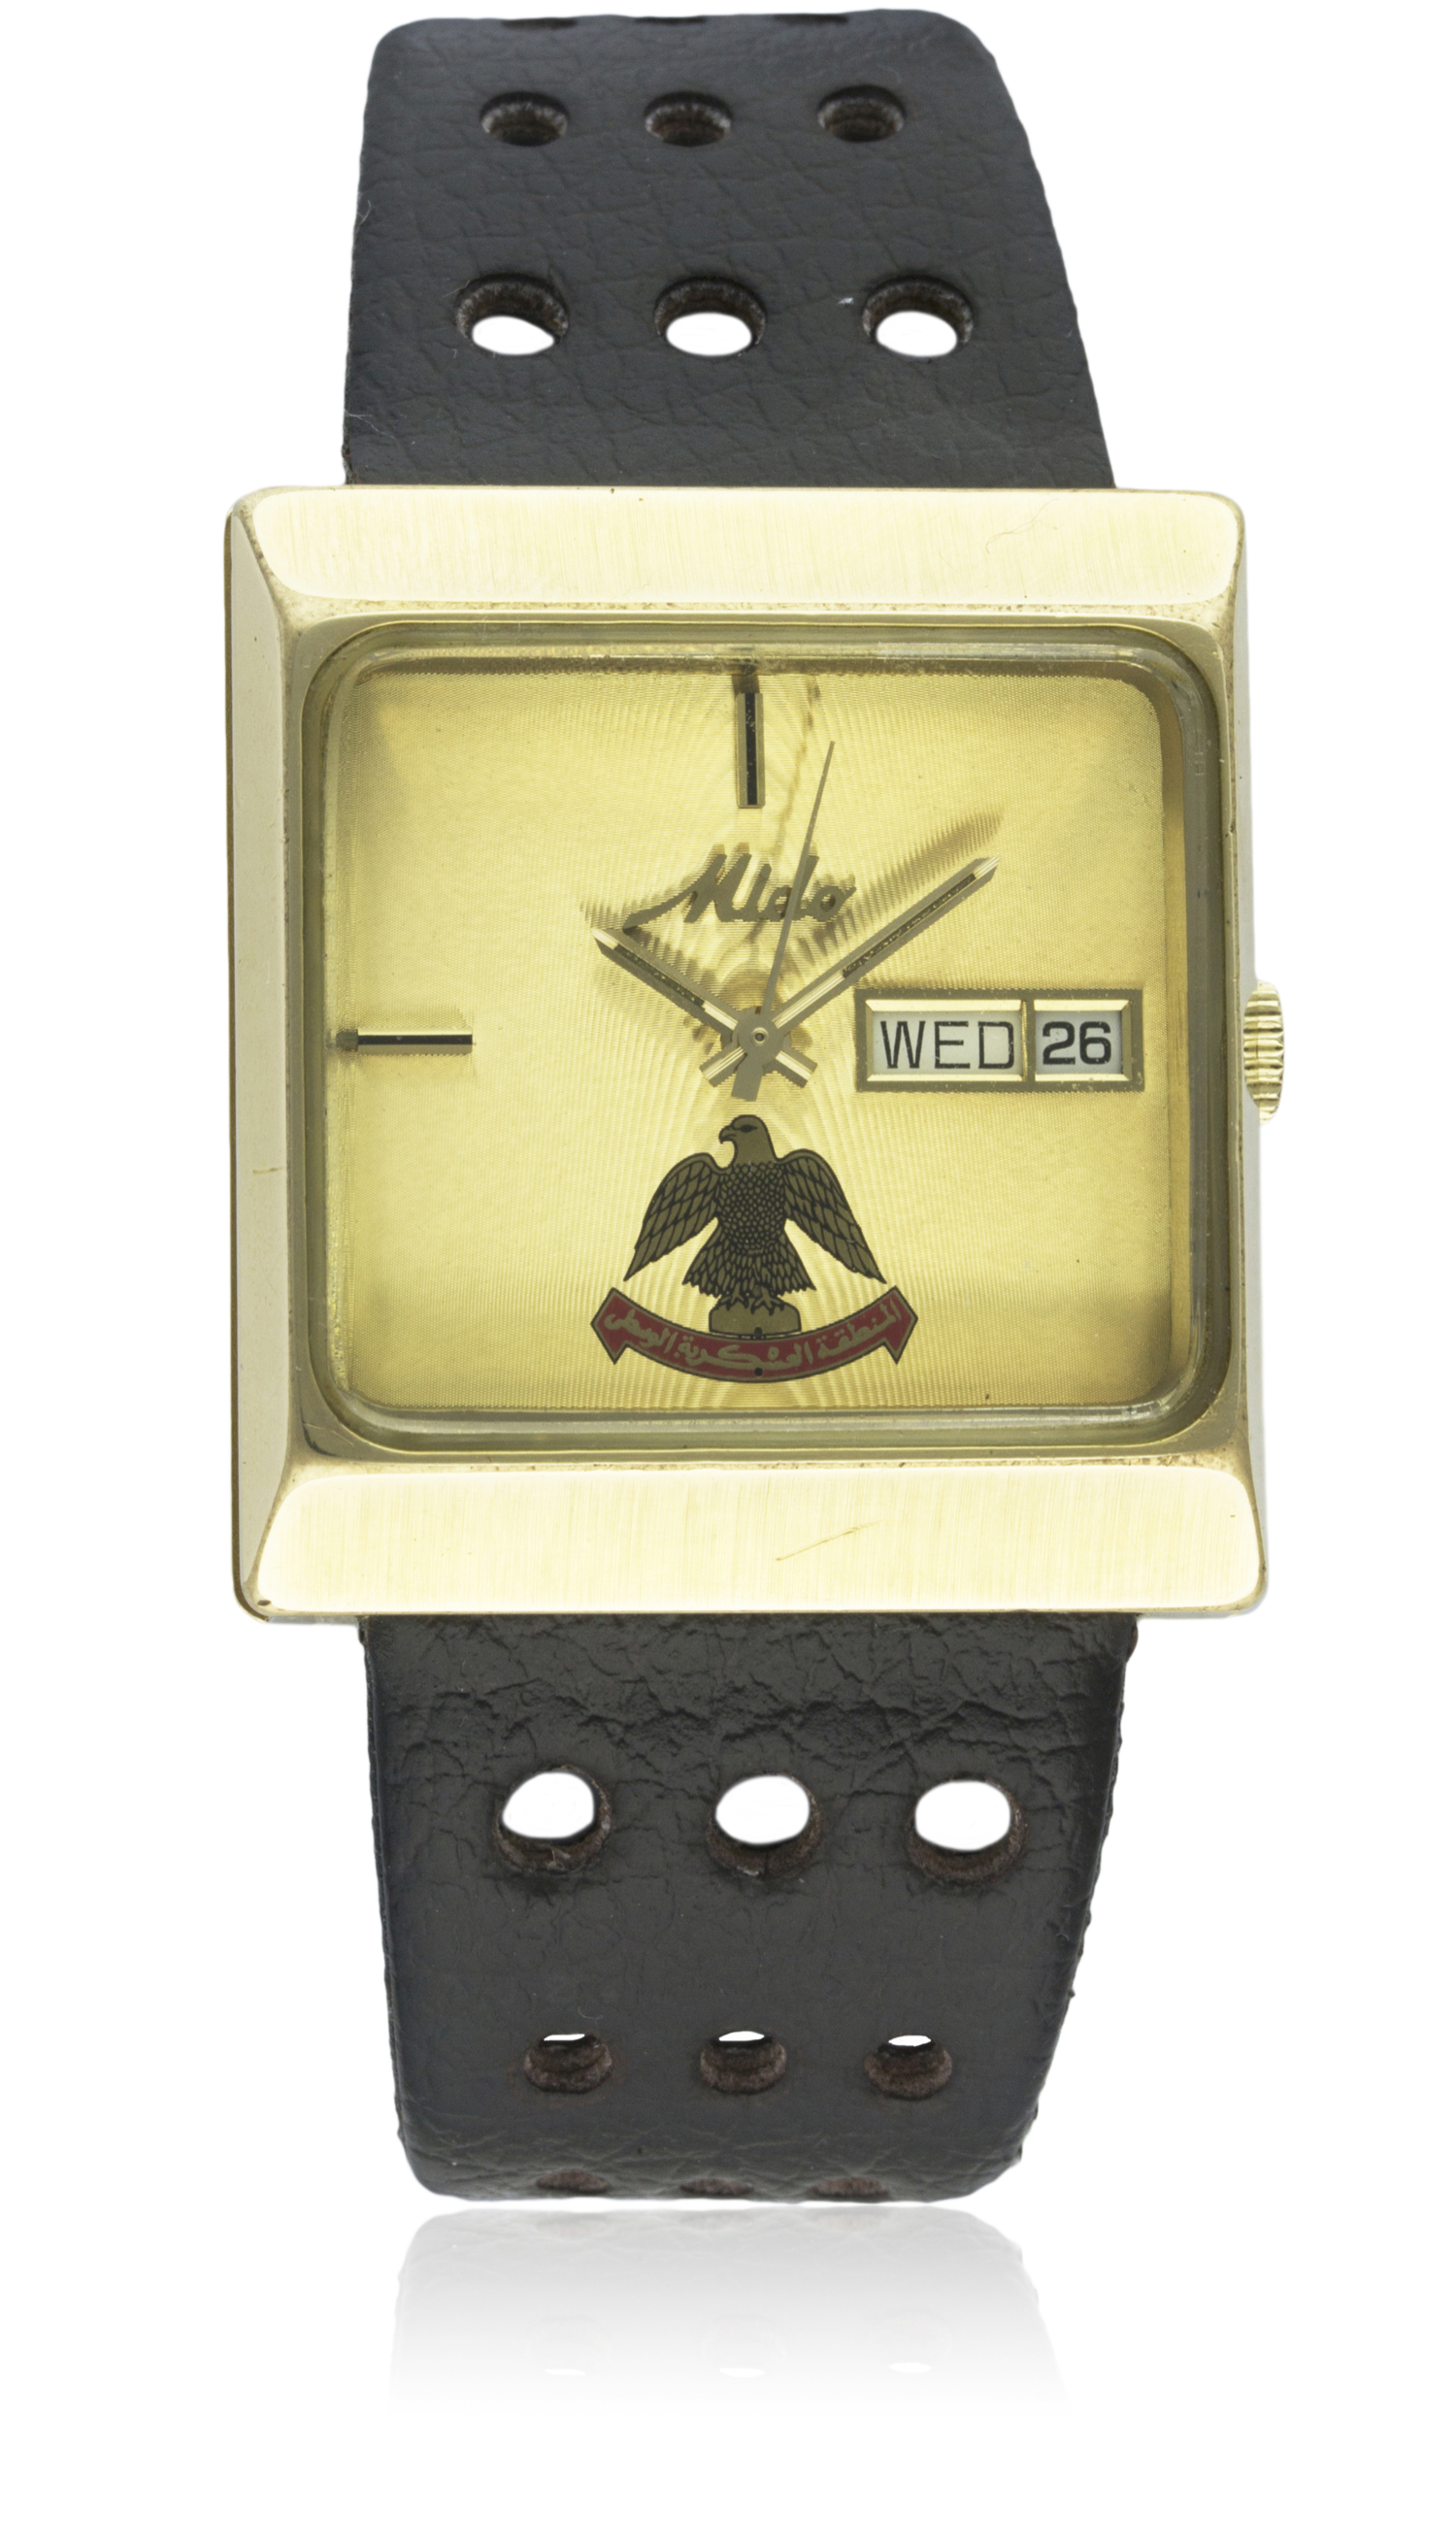 A GENTLEMAN'S GOLD PLATED MIDO AUTOMATIC WRIST WATCH CIRCA 1980s, COMMISSIONED BY THE UAE CENTRAL